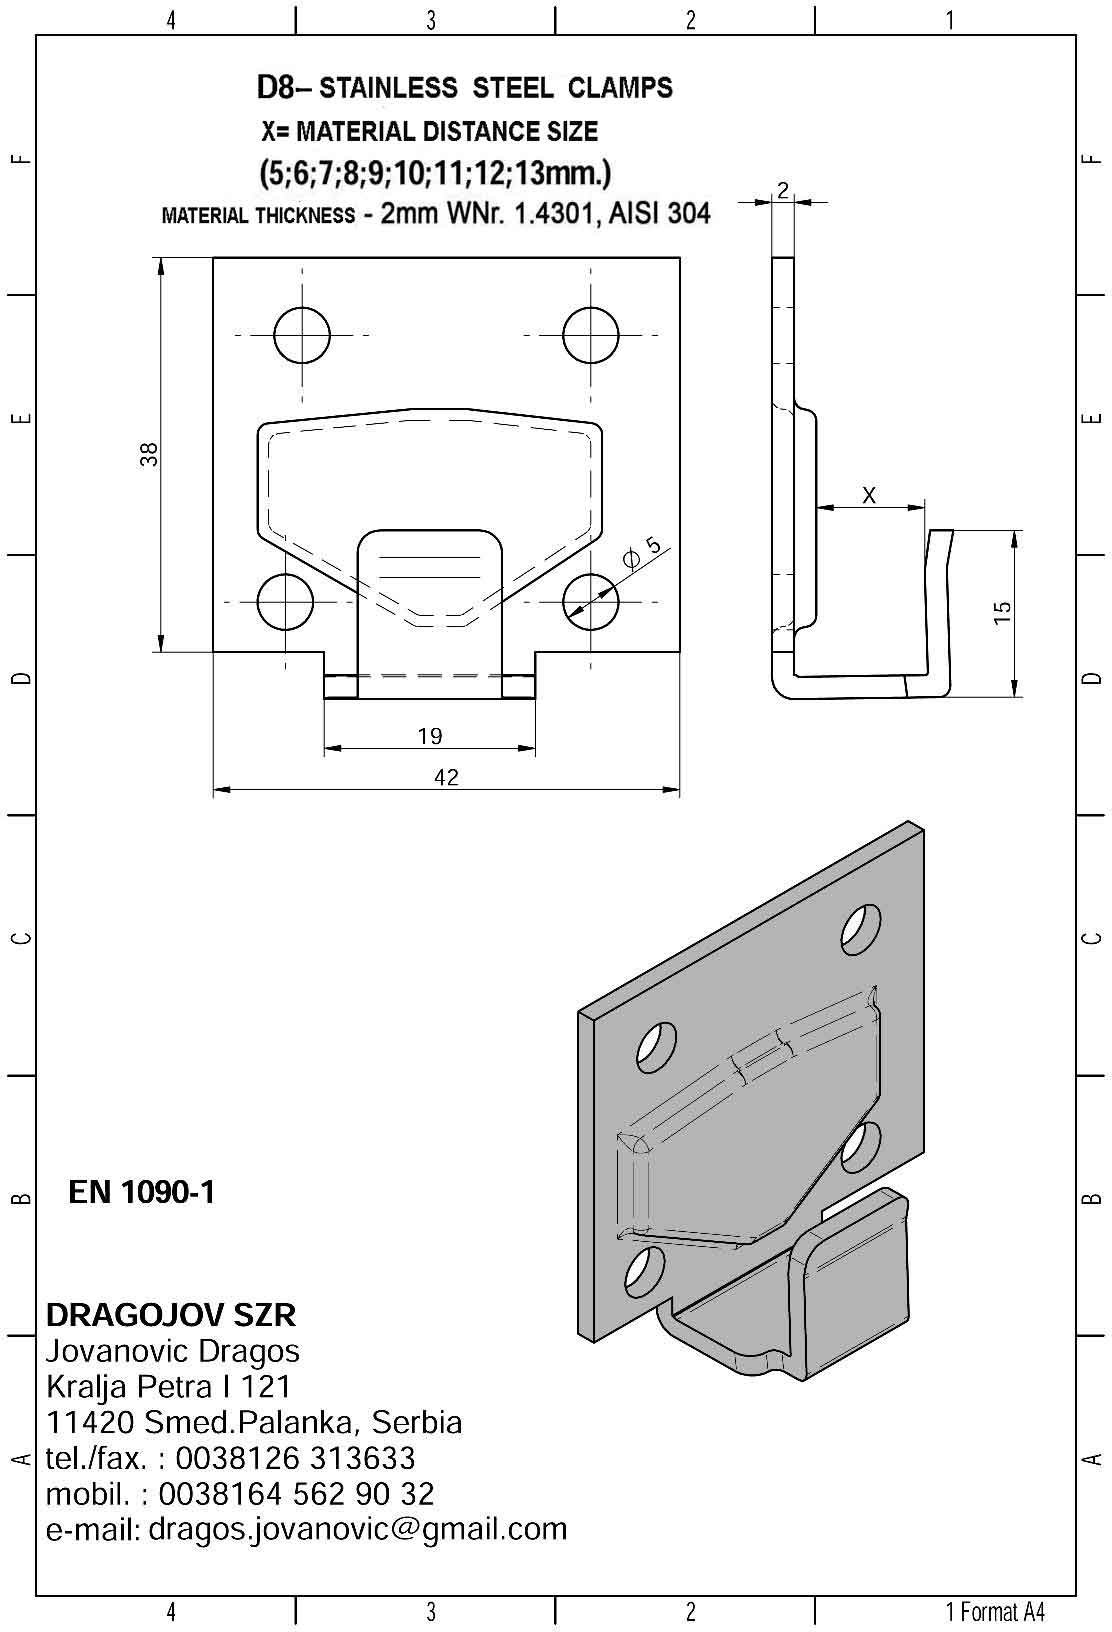 d8-stainless-steel-clamps